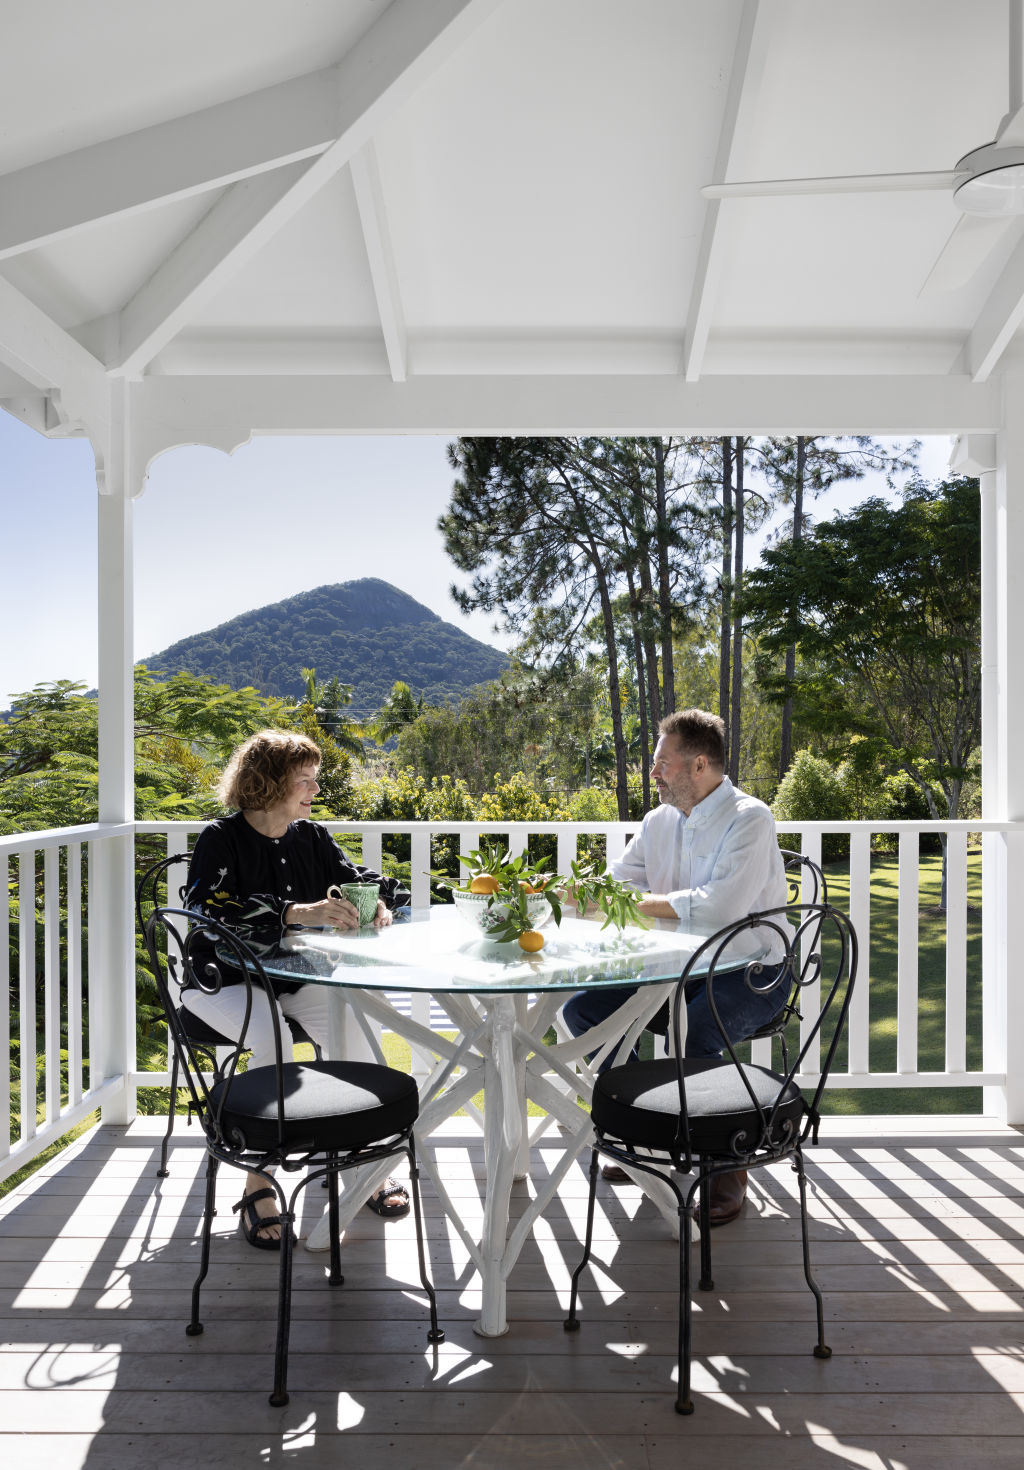 Dating to 1916, Rangeview sits on its original site looking towards Mount Cooroy. Photo: The Design Villa